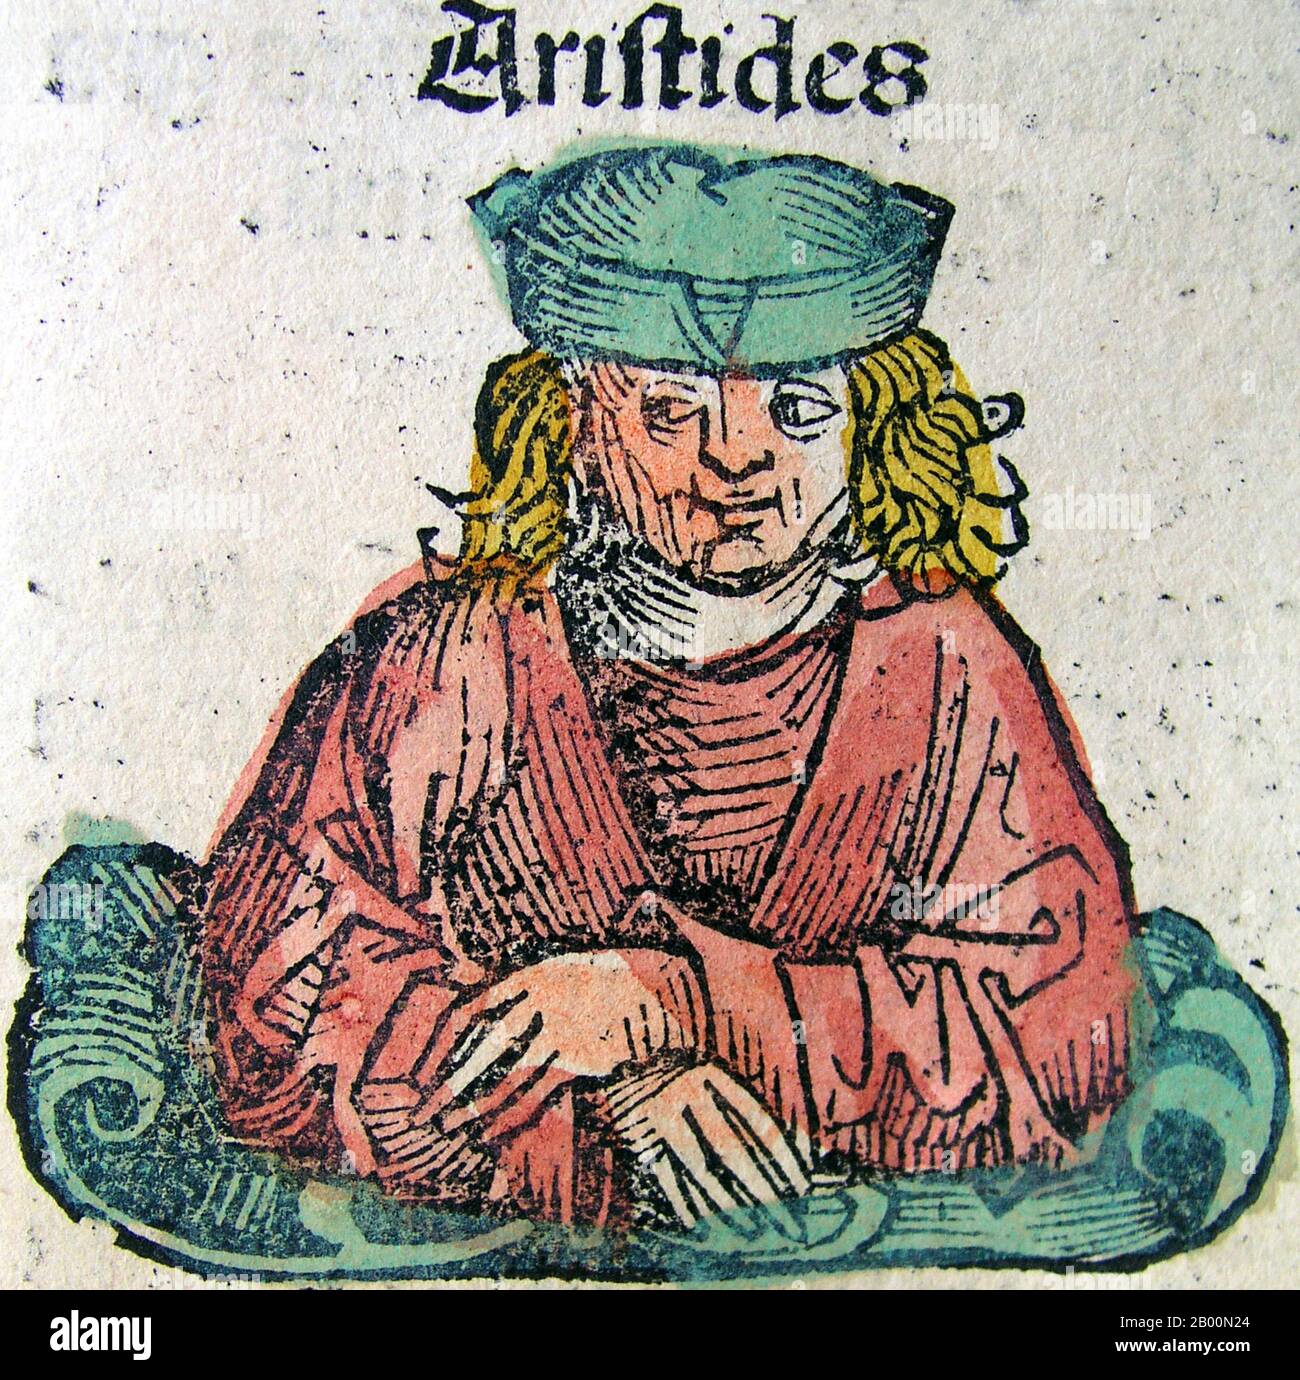 Germany: 'Aristides'. The Nuremberg Chronicle, by Hartmann Schedel (1440-1514), 1493.  The Nuremberg Chronicle is an illustrated world history. Its structure follows the story of human history as related in the Bible; it includes the histories of a number of important Western cities. Written in Latin by Hartmann Schedel, with a version in German translation by Georg Alt, it appeared in 1493. It is one of the best-documented early printed books. It is classified as an incunabulum – that is, a book, pamphlet, or broadside that was printed (not handwritten) before the year 1501 in Europe. Stock Photo